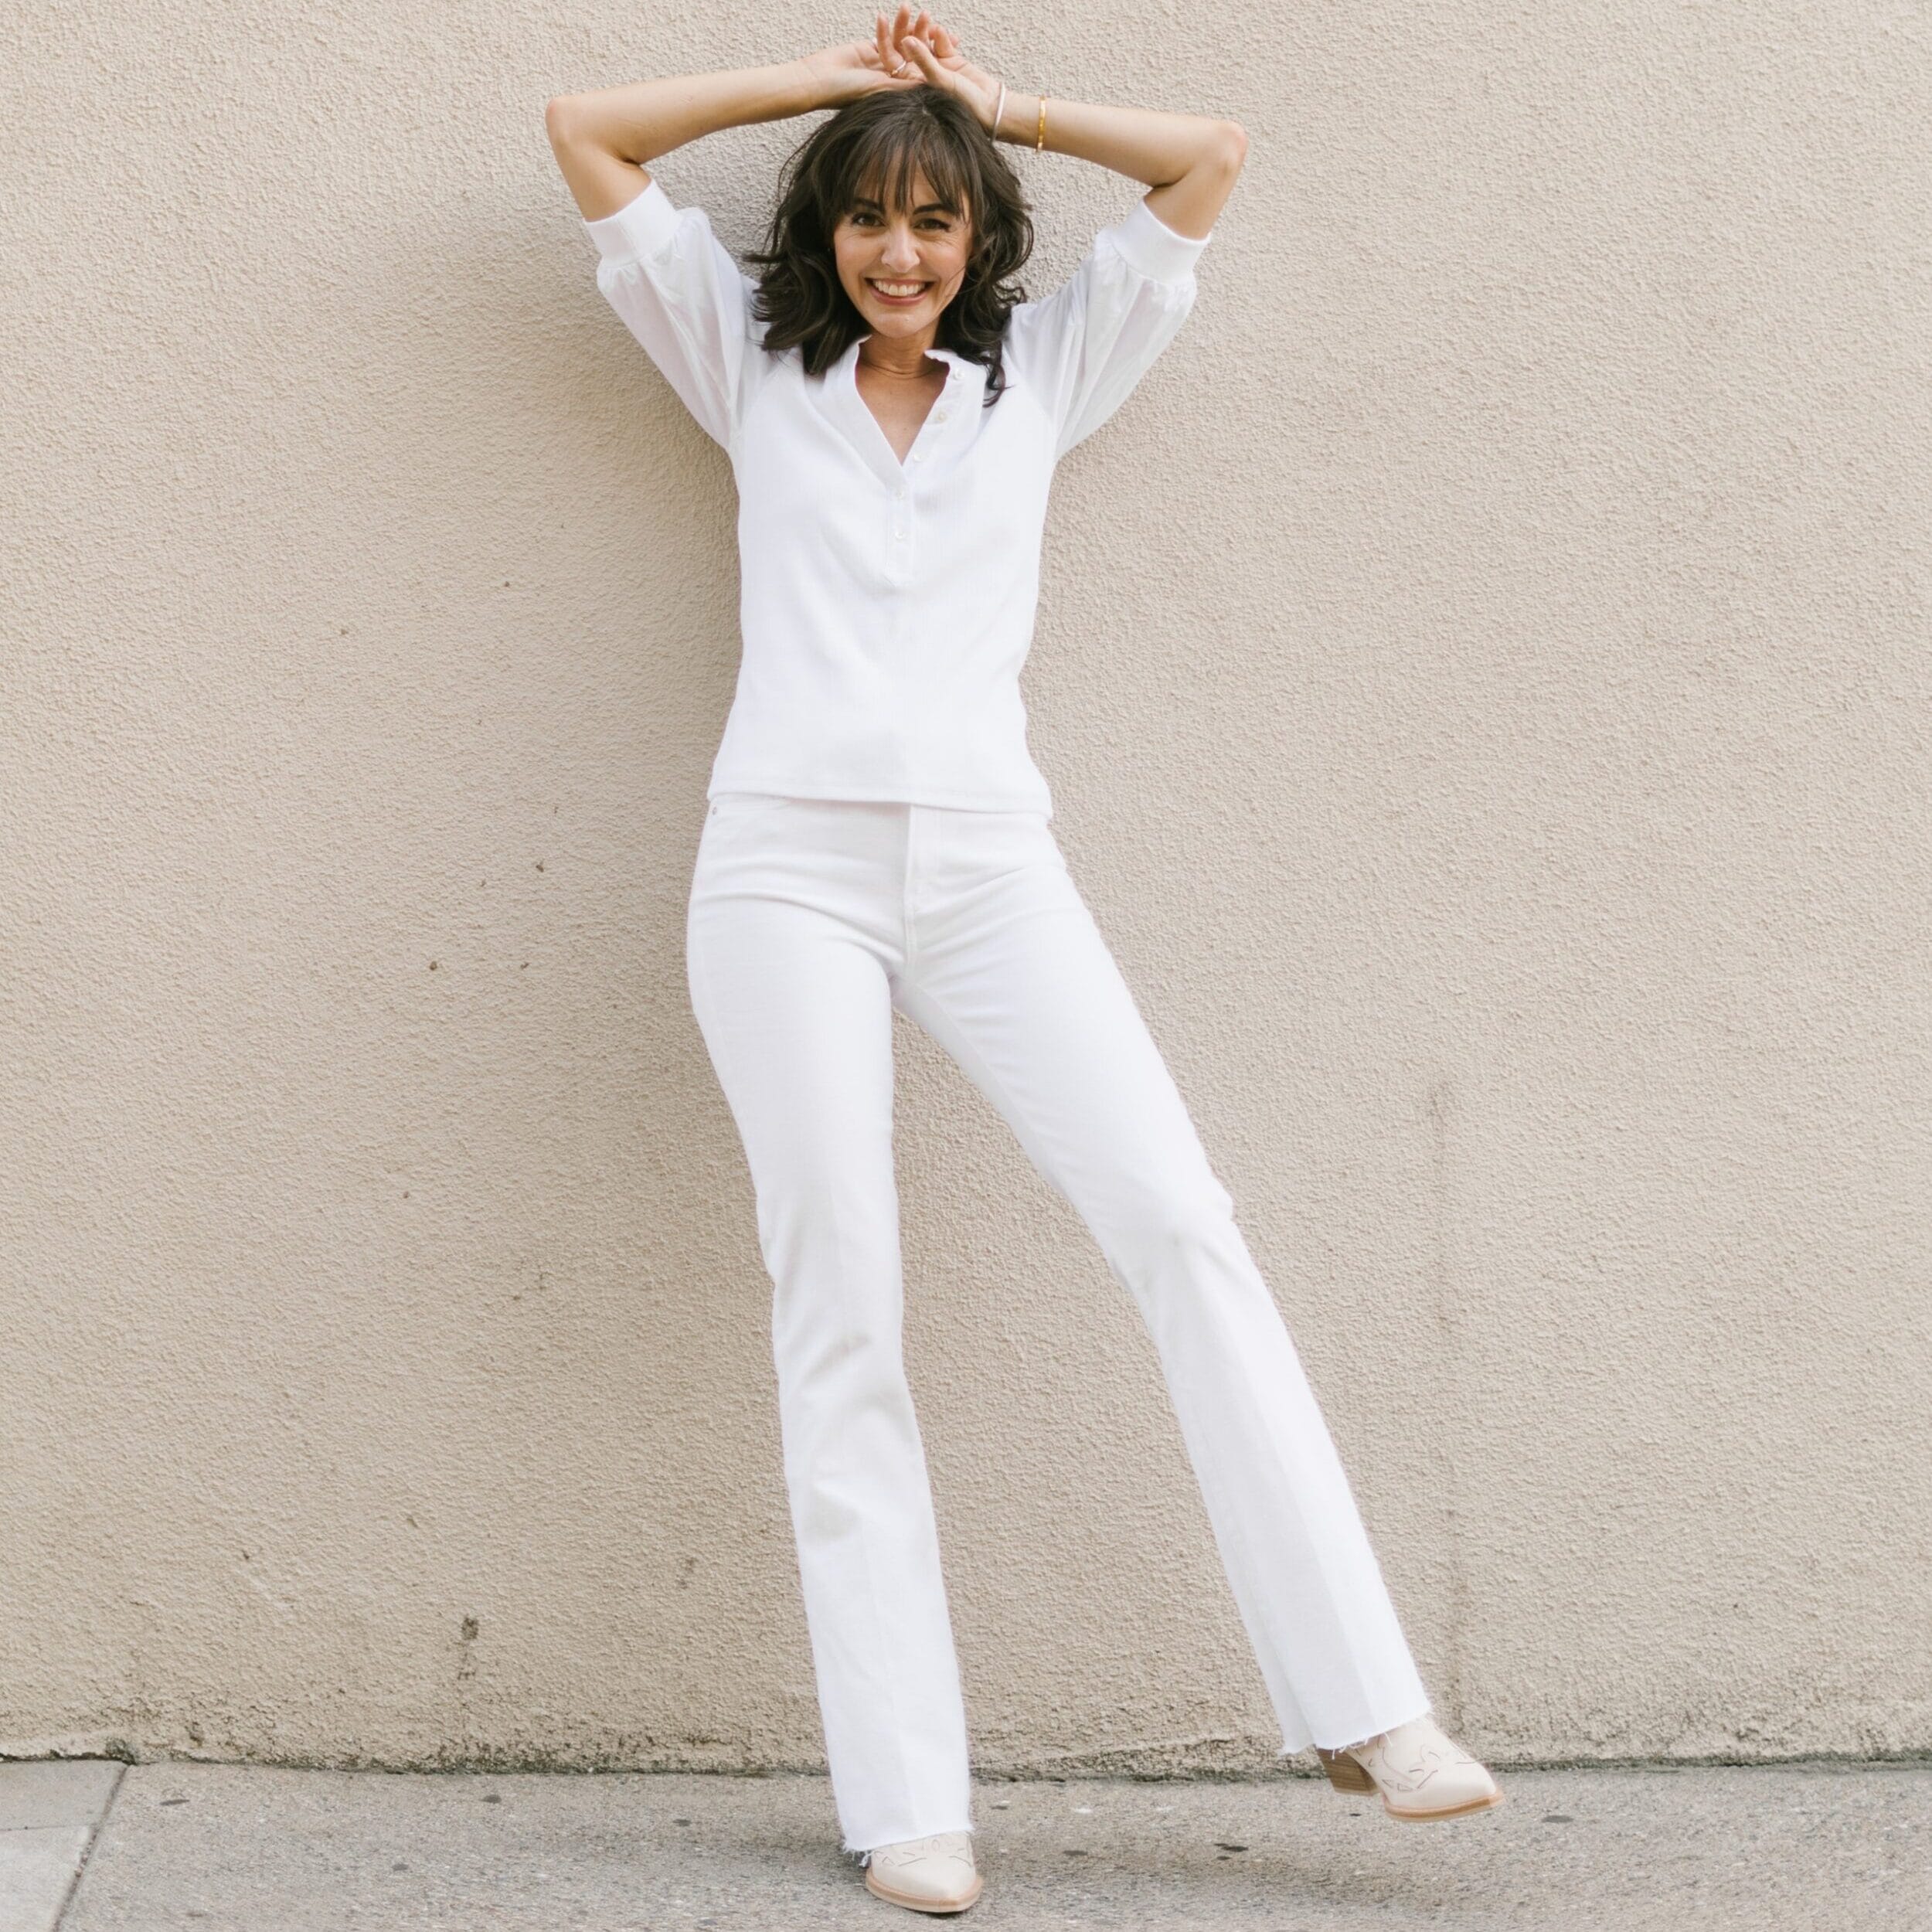 jennifer sattler wearing an all white jeans outfit and white puff sleeve veronica beard top
